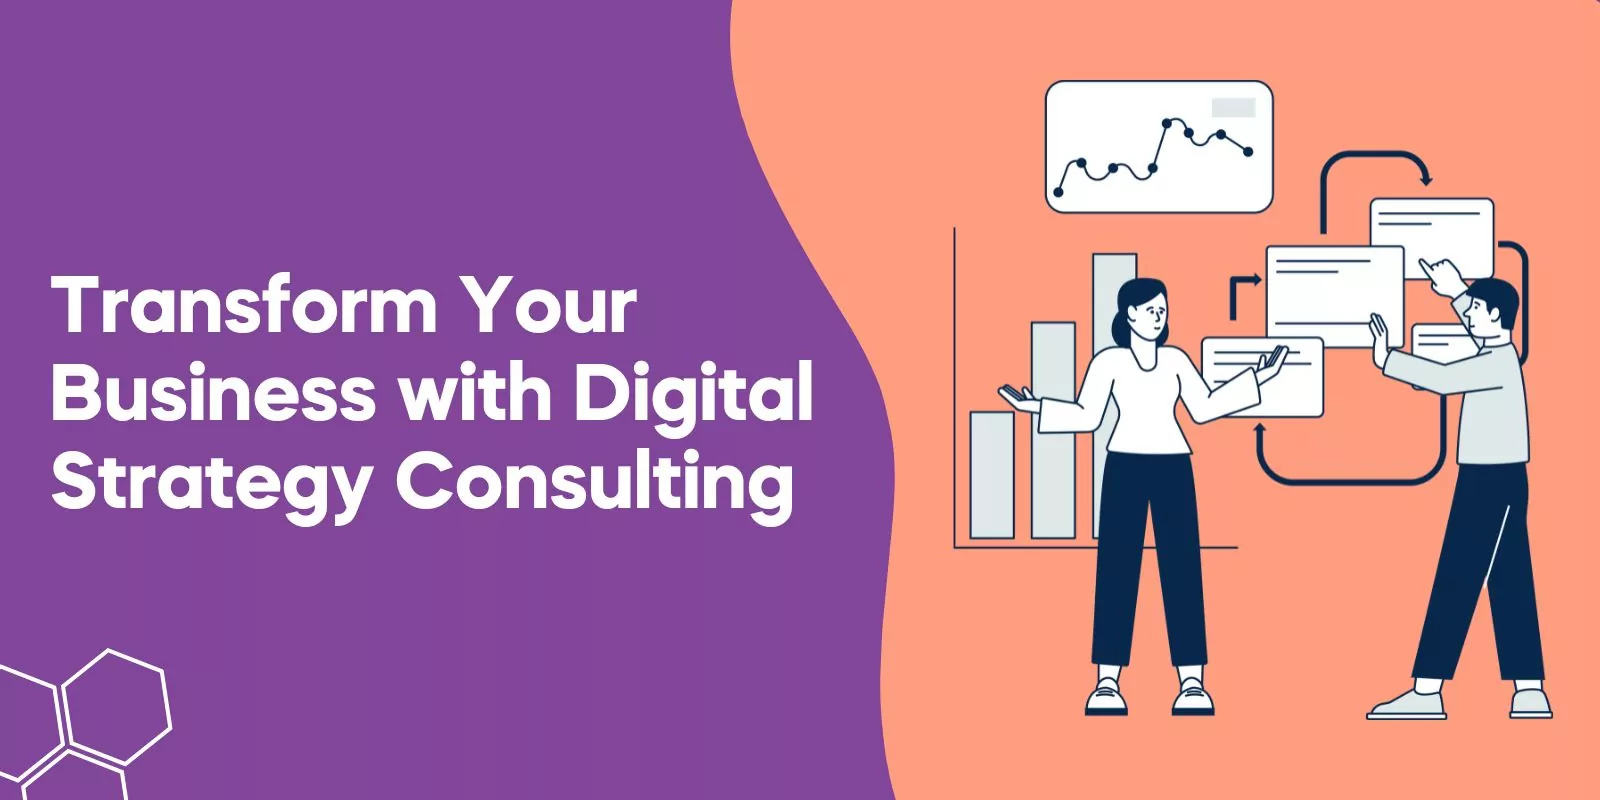 Transform Your Business with Digital Strategy Consulting